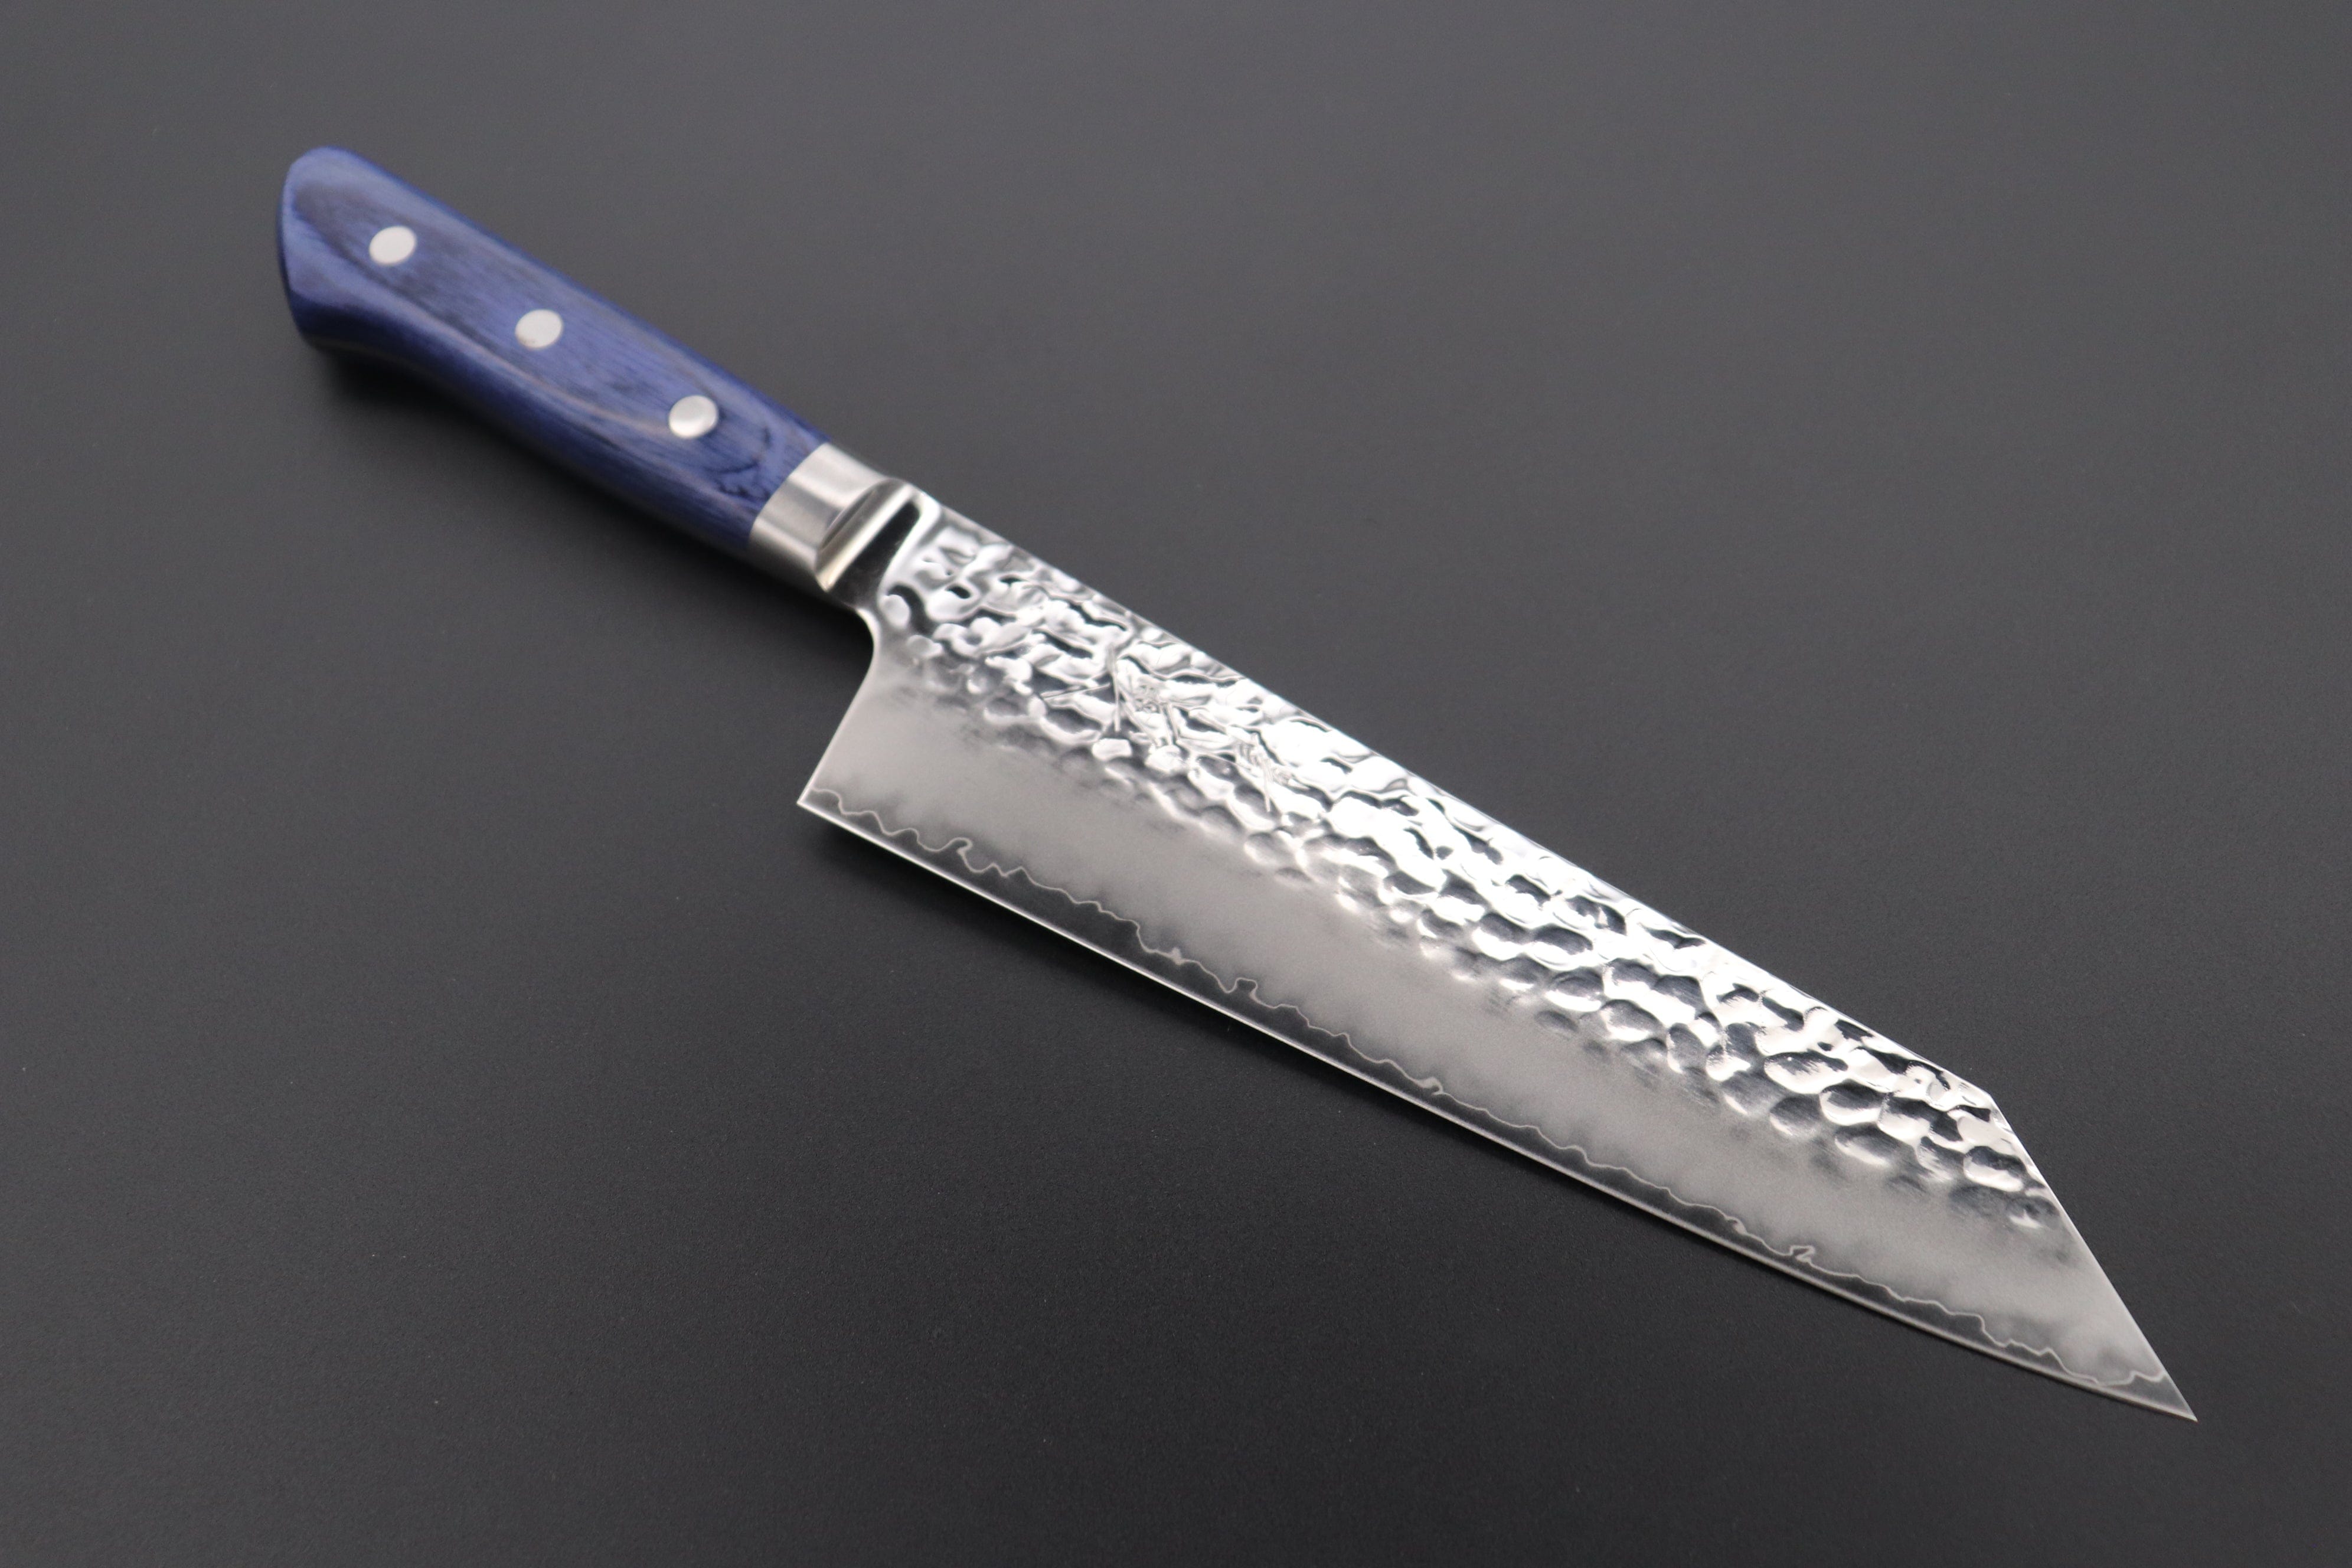 The KITA 6 Chef's Knife features a beautifully hammered blade crafted from  our remarkable X-7 Steel. The rich blue octagonal handle is…